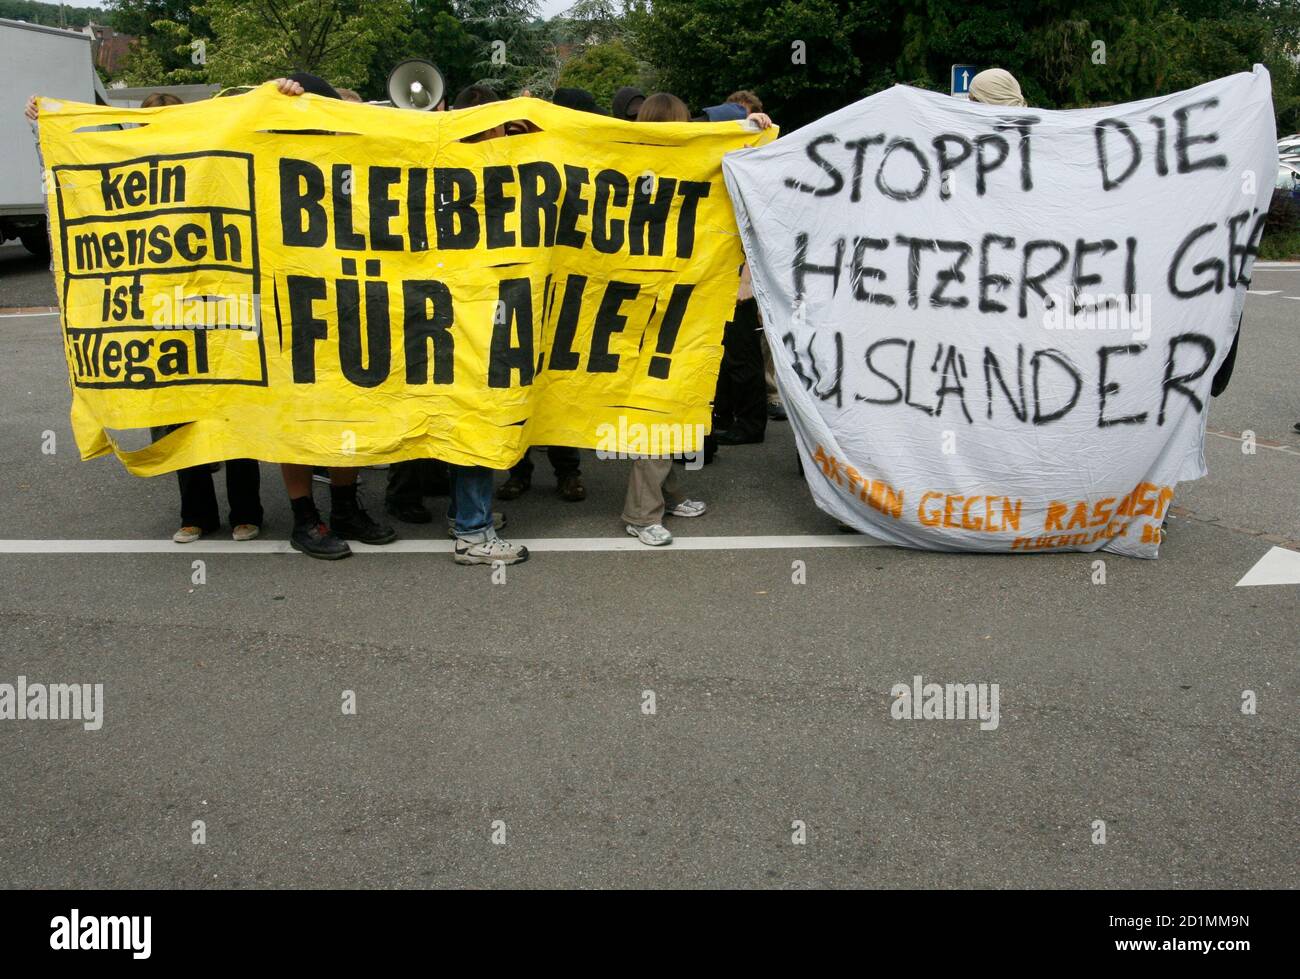 Protesters demonstrate in front of the Swiss People's Party congress in Liestal June 30, 2007. The banner reads 'Bleiberecht fuer alle' (right of abode for all) and 'Stopp die Hetzerei gegen Auslaender' (stop the hurry against foreigners).  REUTERS/Ruben Sprich (SWITZERLAND) Stock Photo